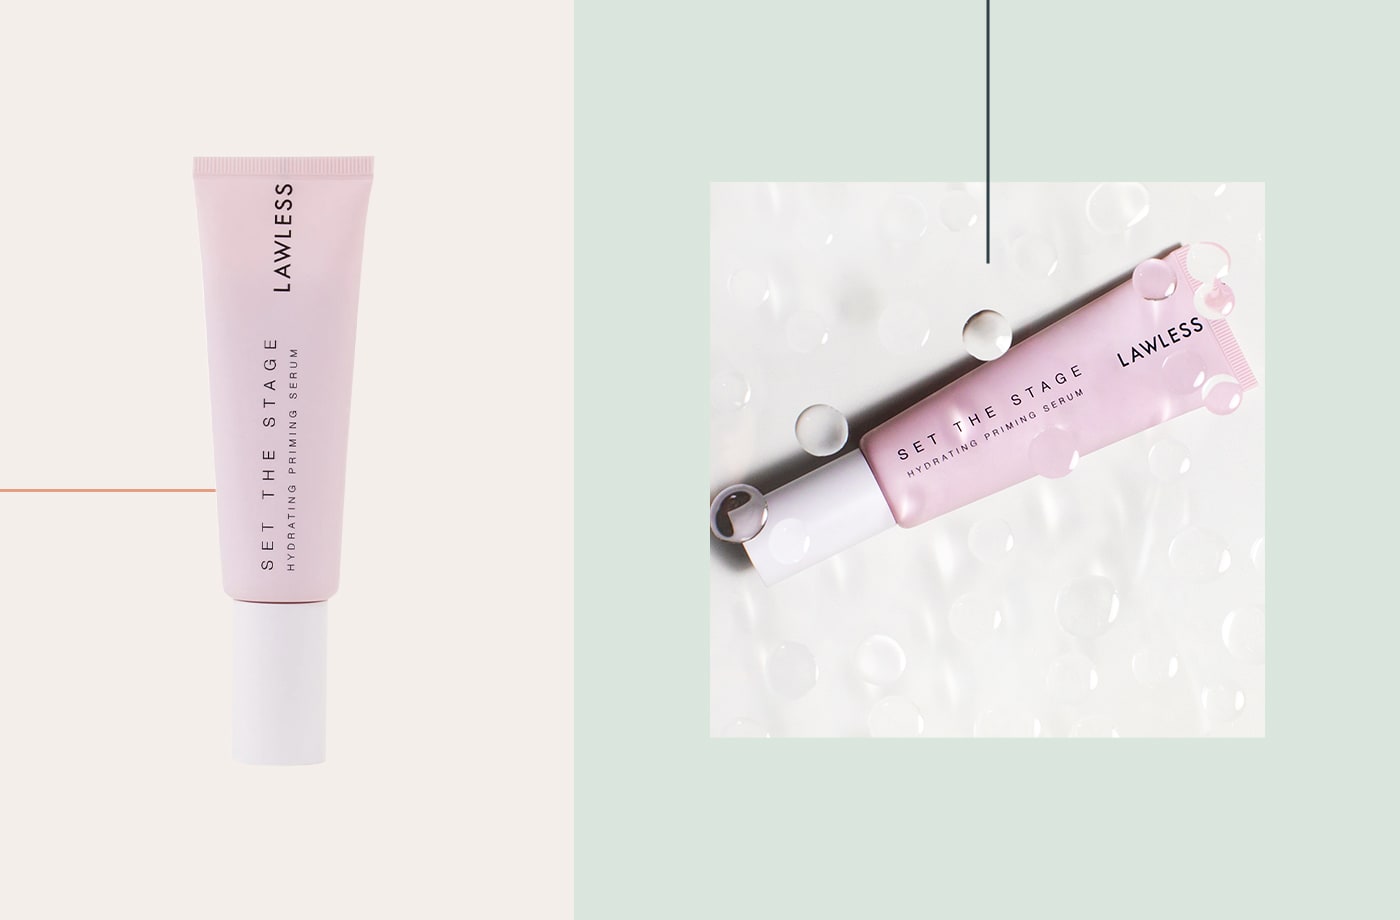 This hydrating primer slashed 5 total steps out of my skin care routine—and I'm head-over-heels in love